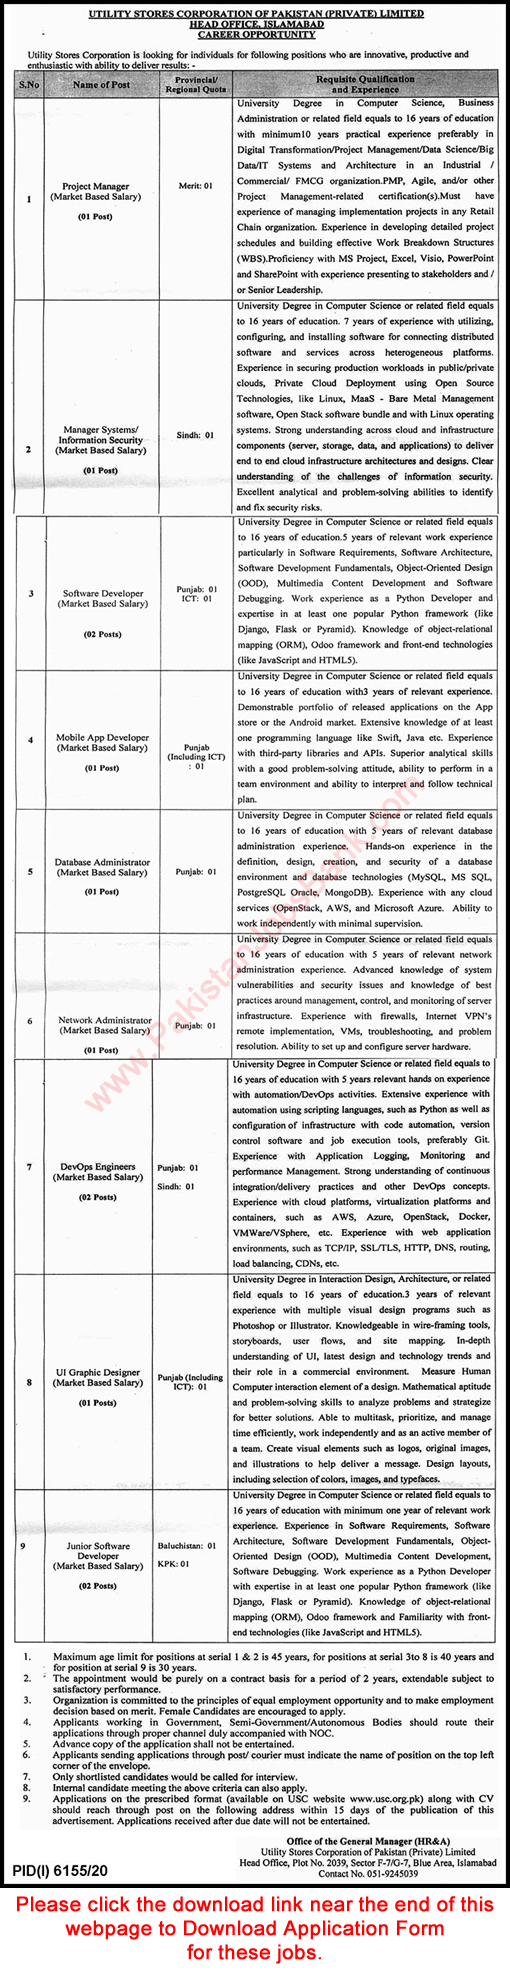 Utility Stores Corporation Jobs May 2021 Application Form Software Developer & Others Latest